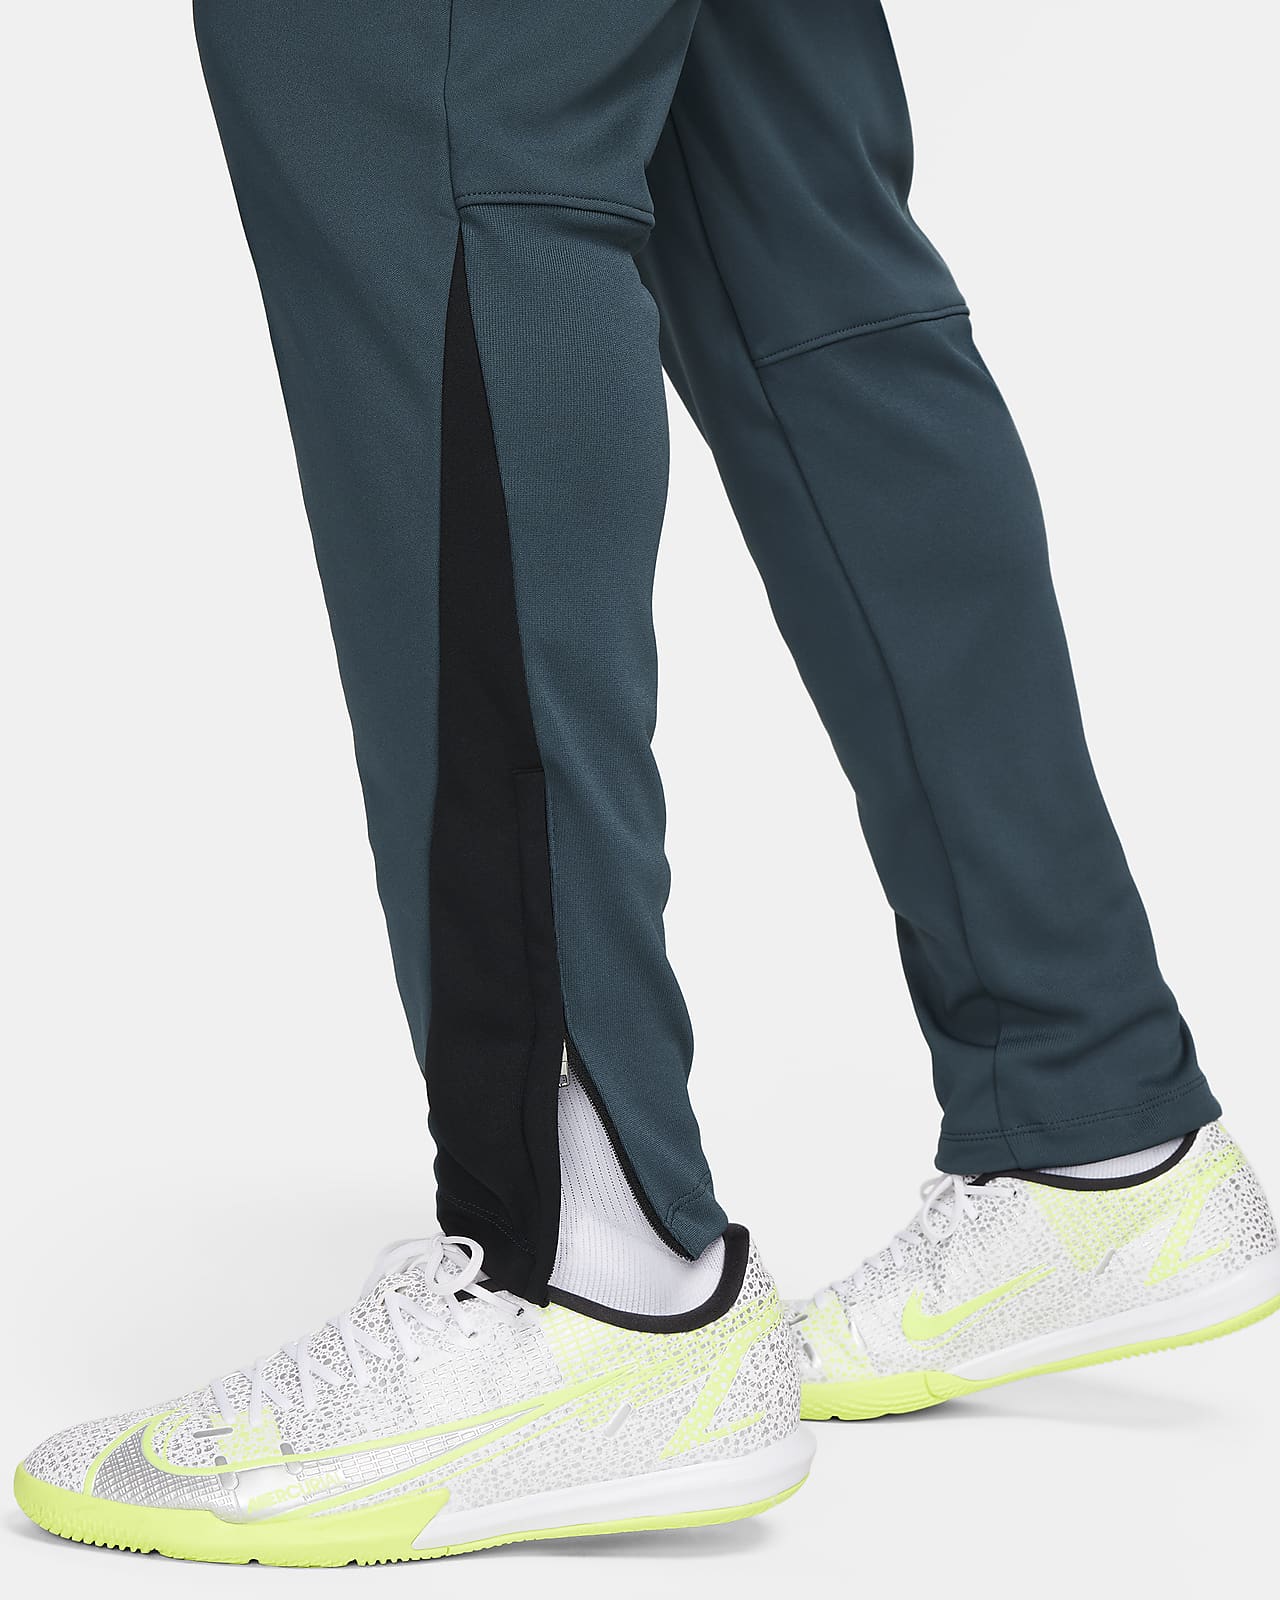 Winter Running Leggings. Running Tights & Trousers. Nike IL